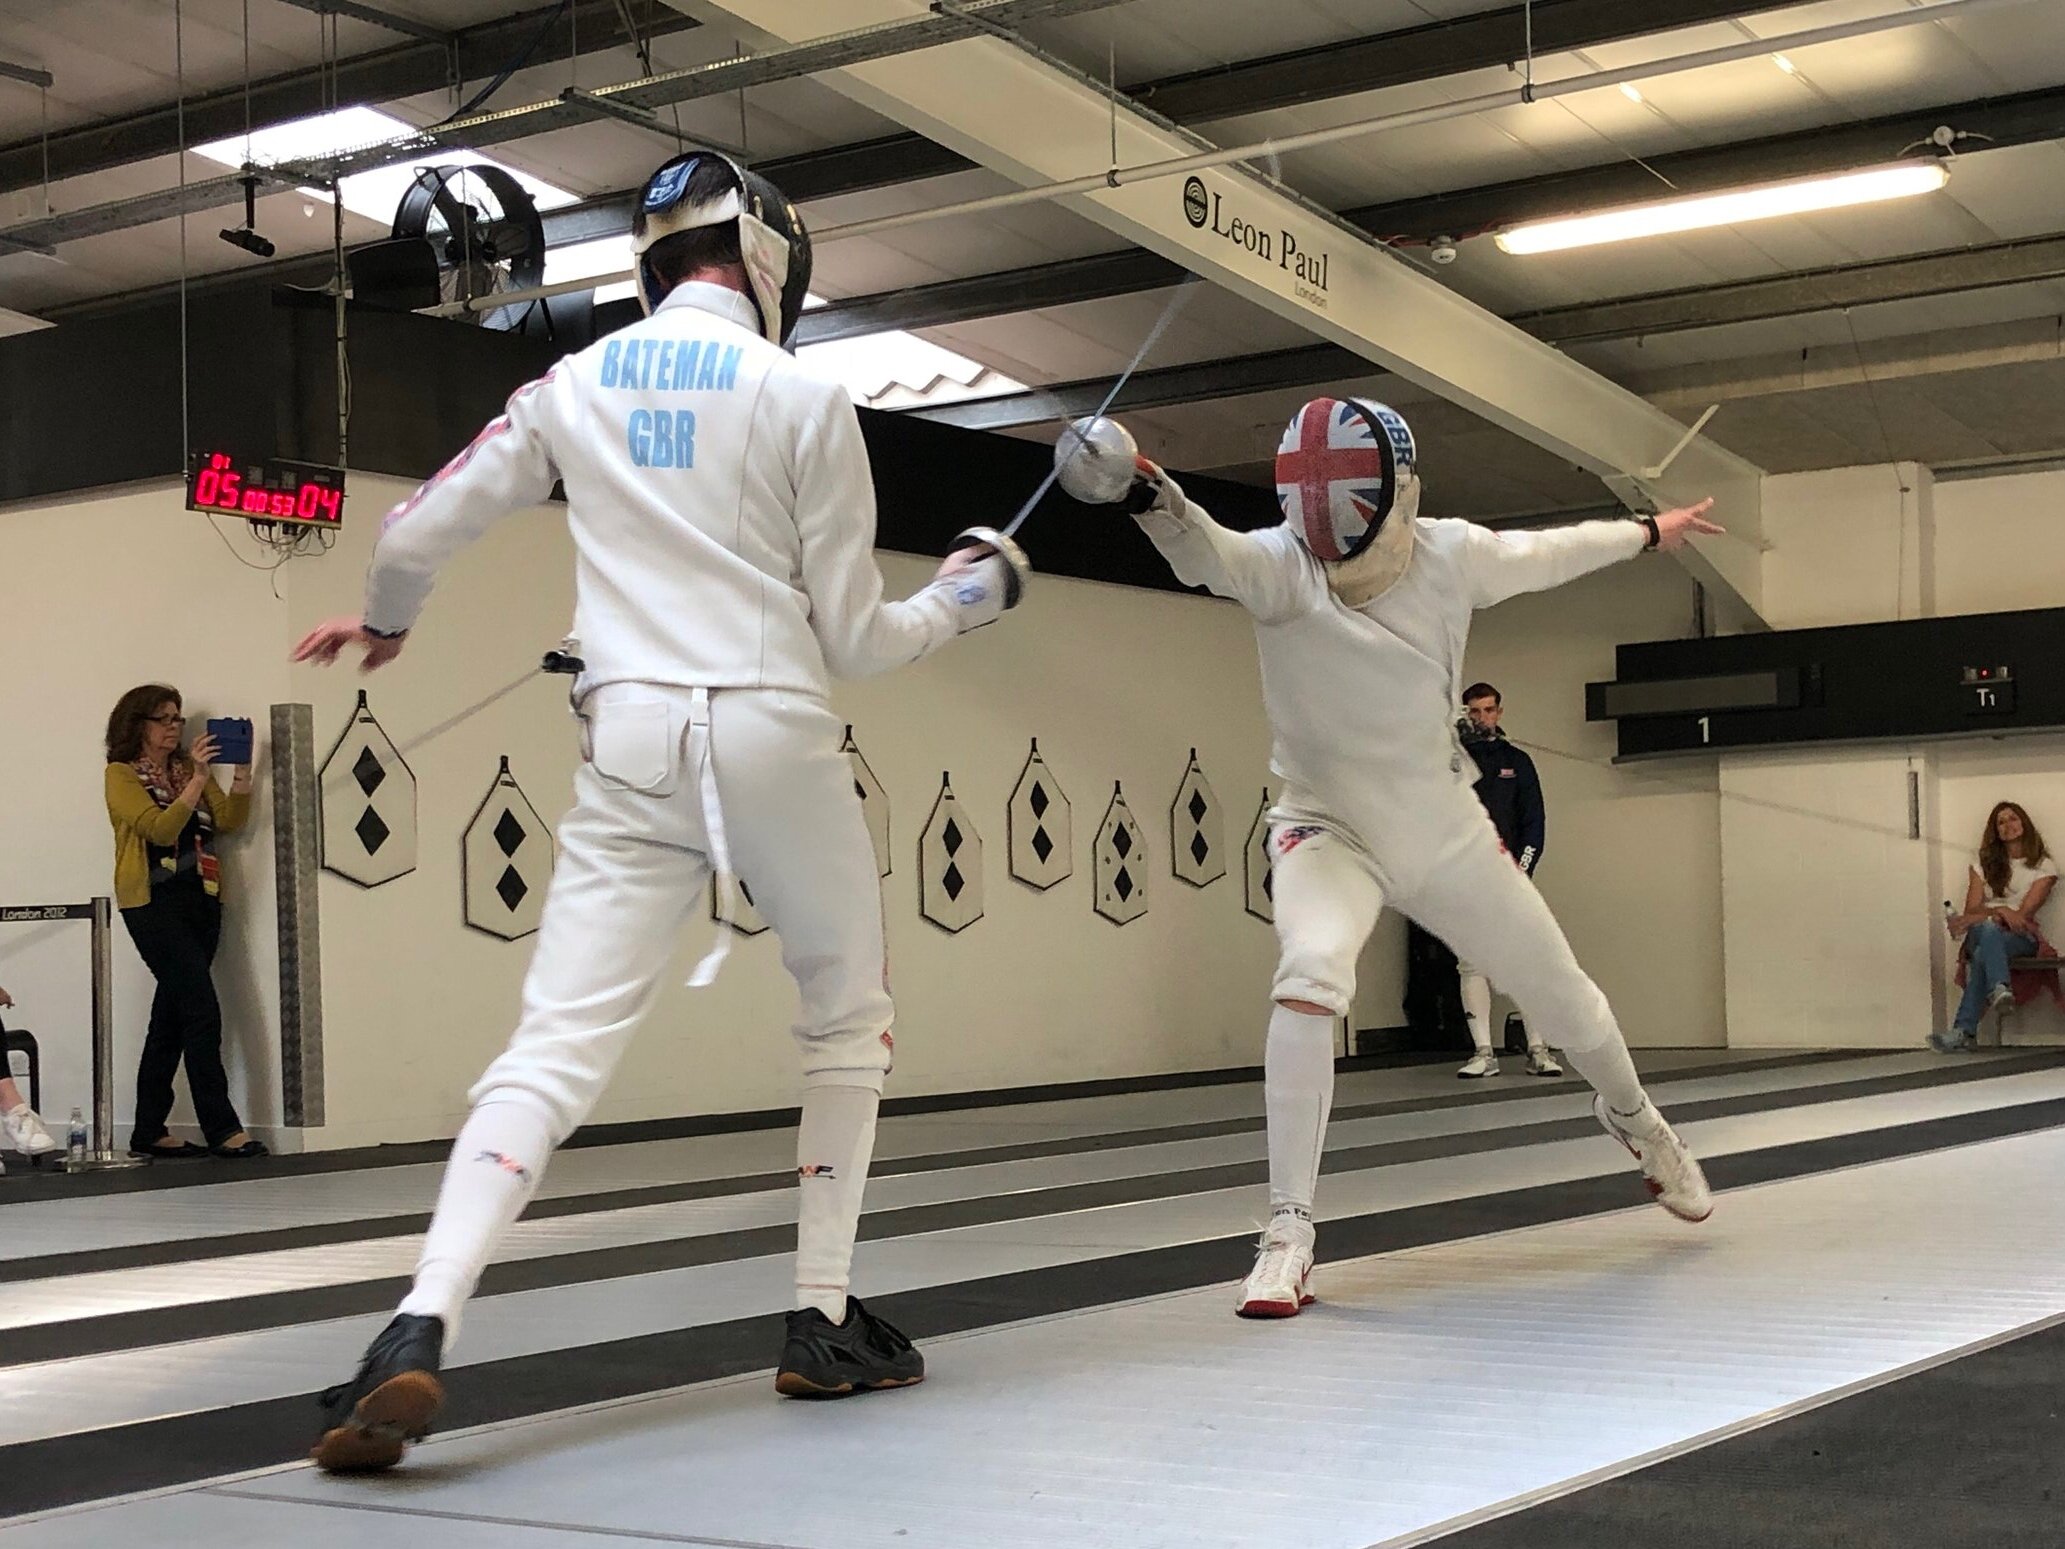 Fencing Championship: Duel Conclusion and Masterful Swordsmanship